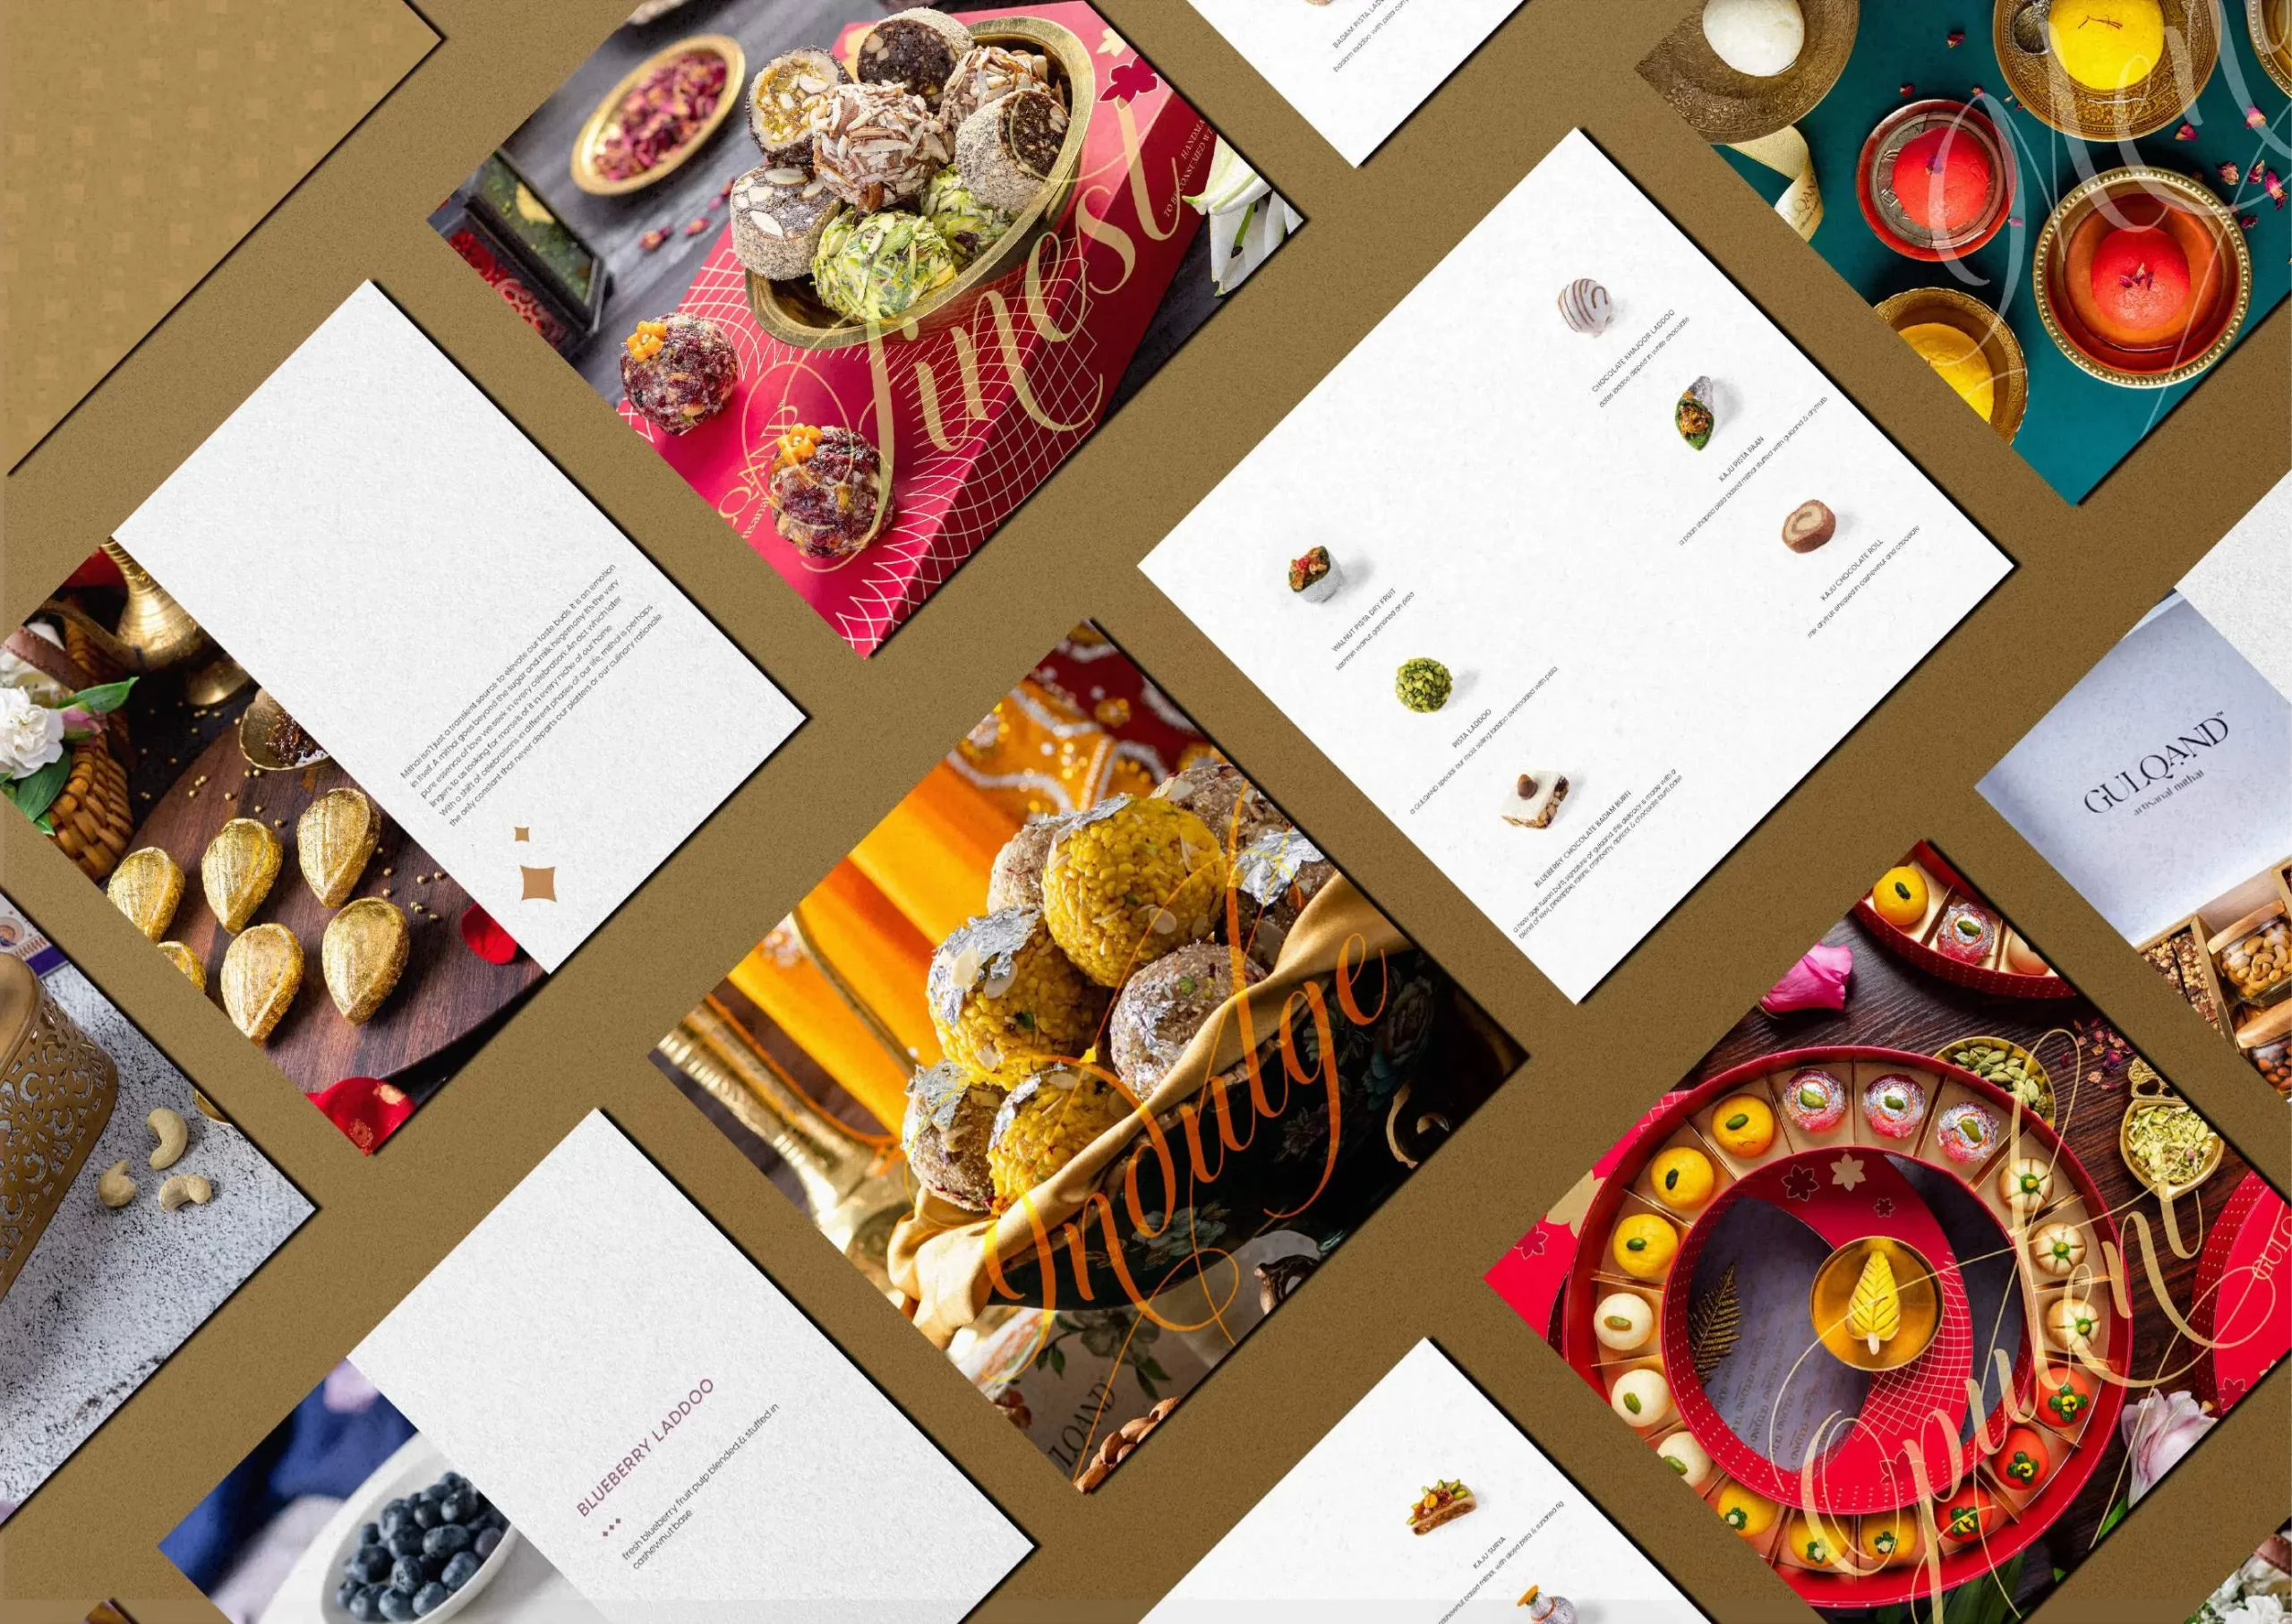 A collection of food and desserts on a brown background.